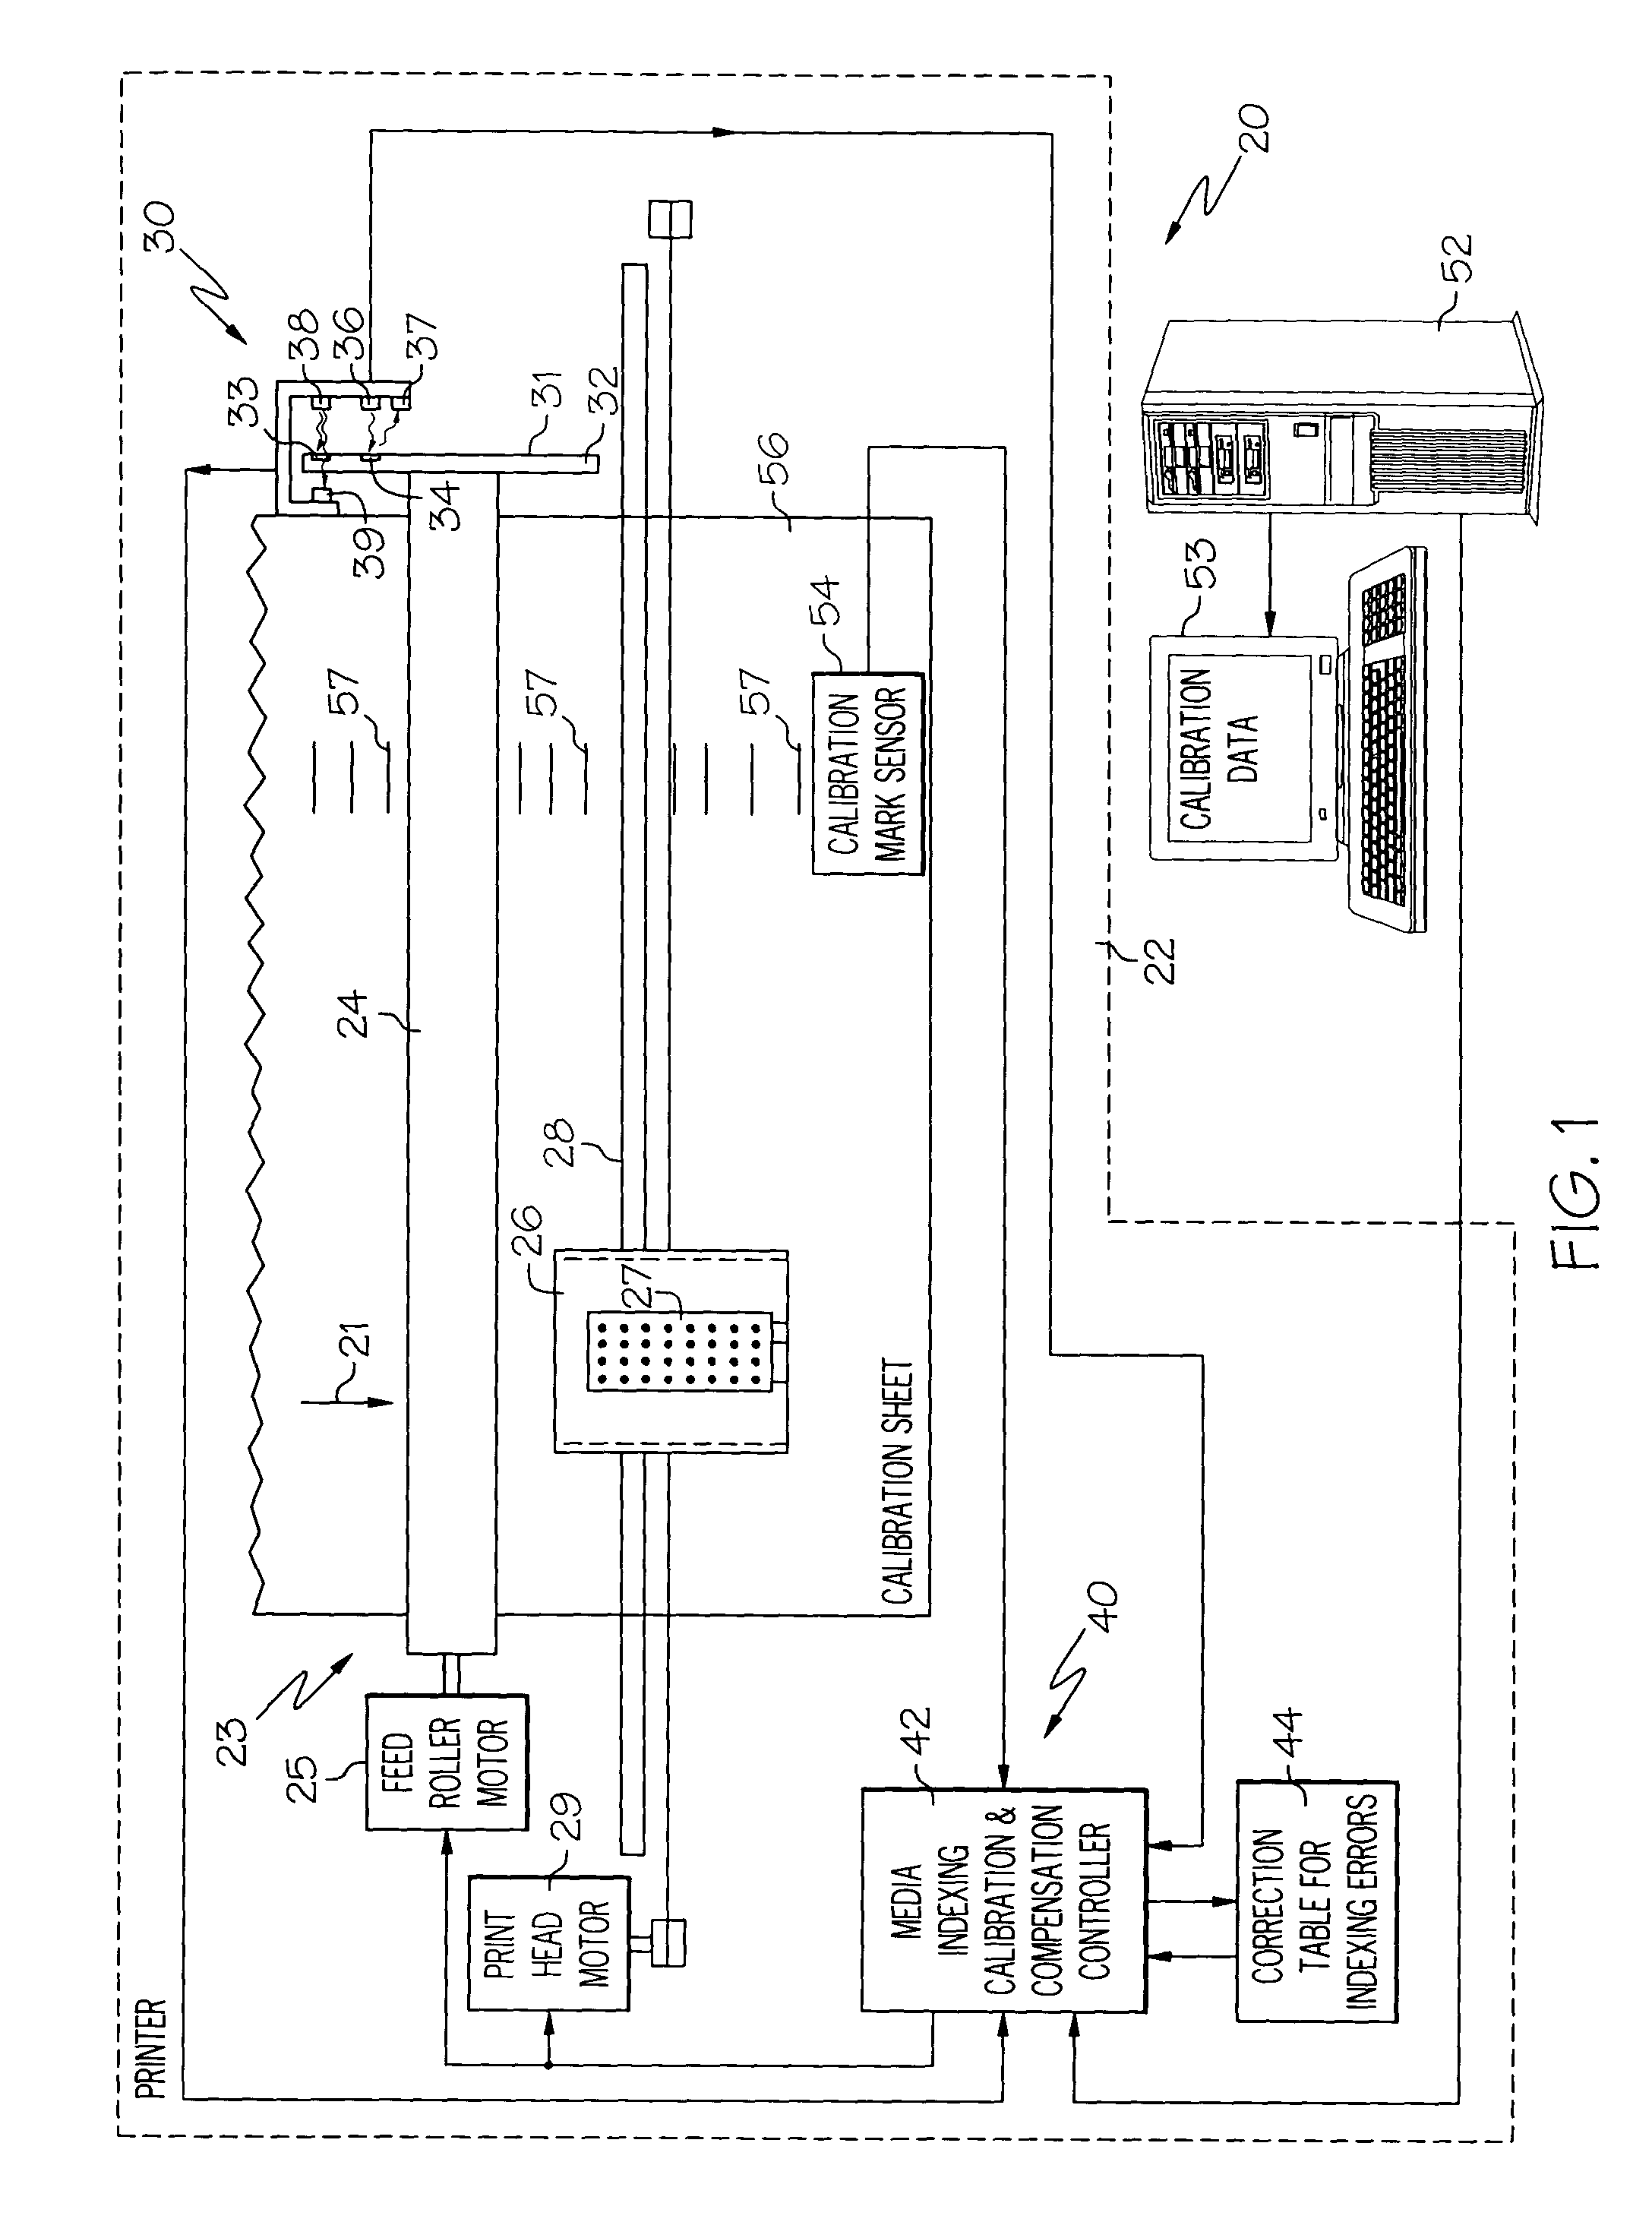 Methods and systems to calibrate media indexing errors in a printing device